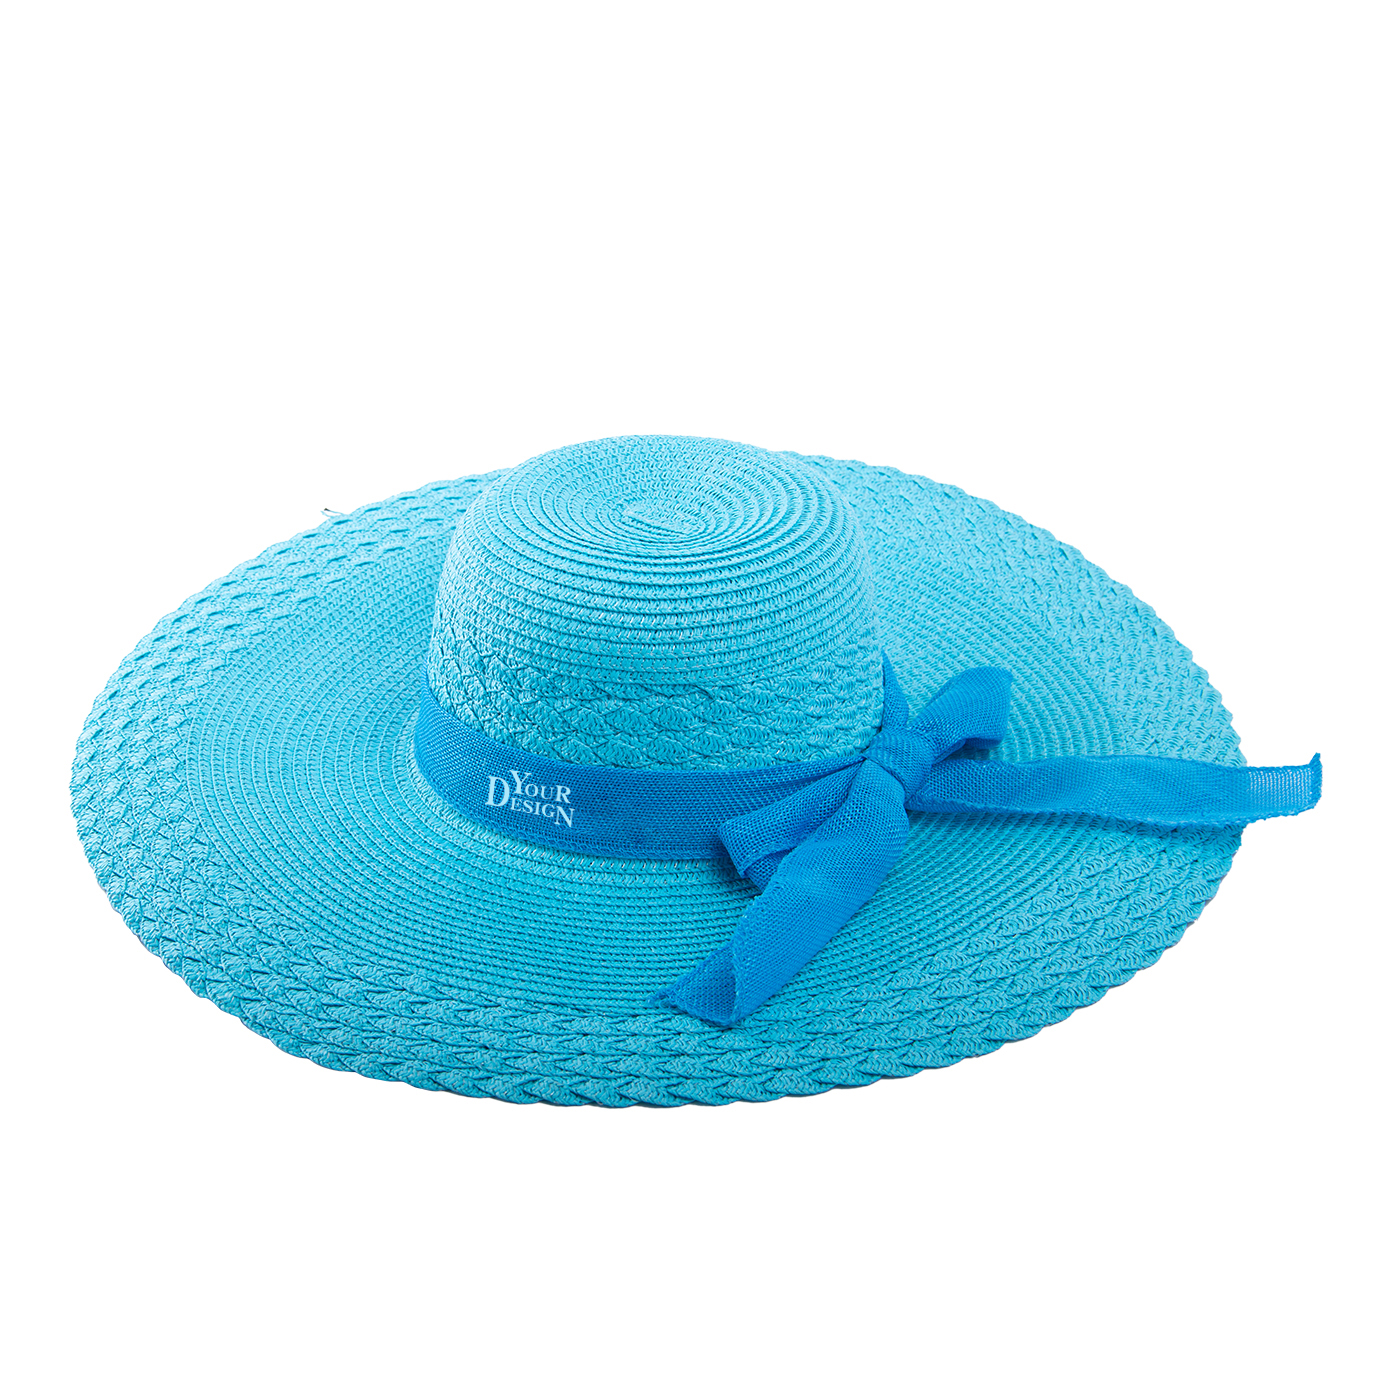 Foldable Wide Brim Floppy Straw Hat With Bow1